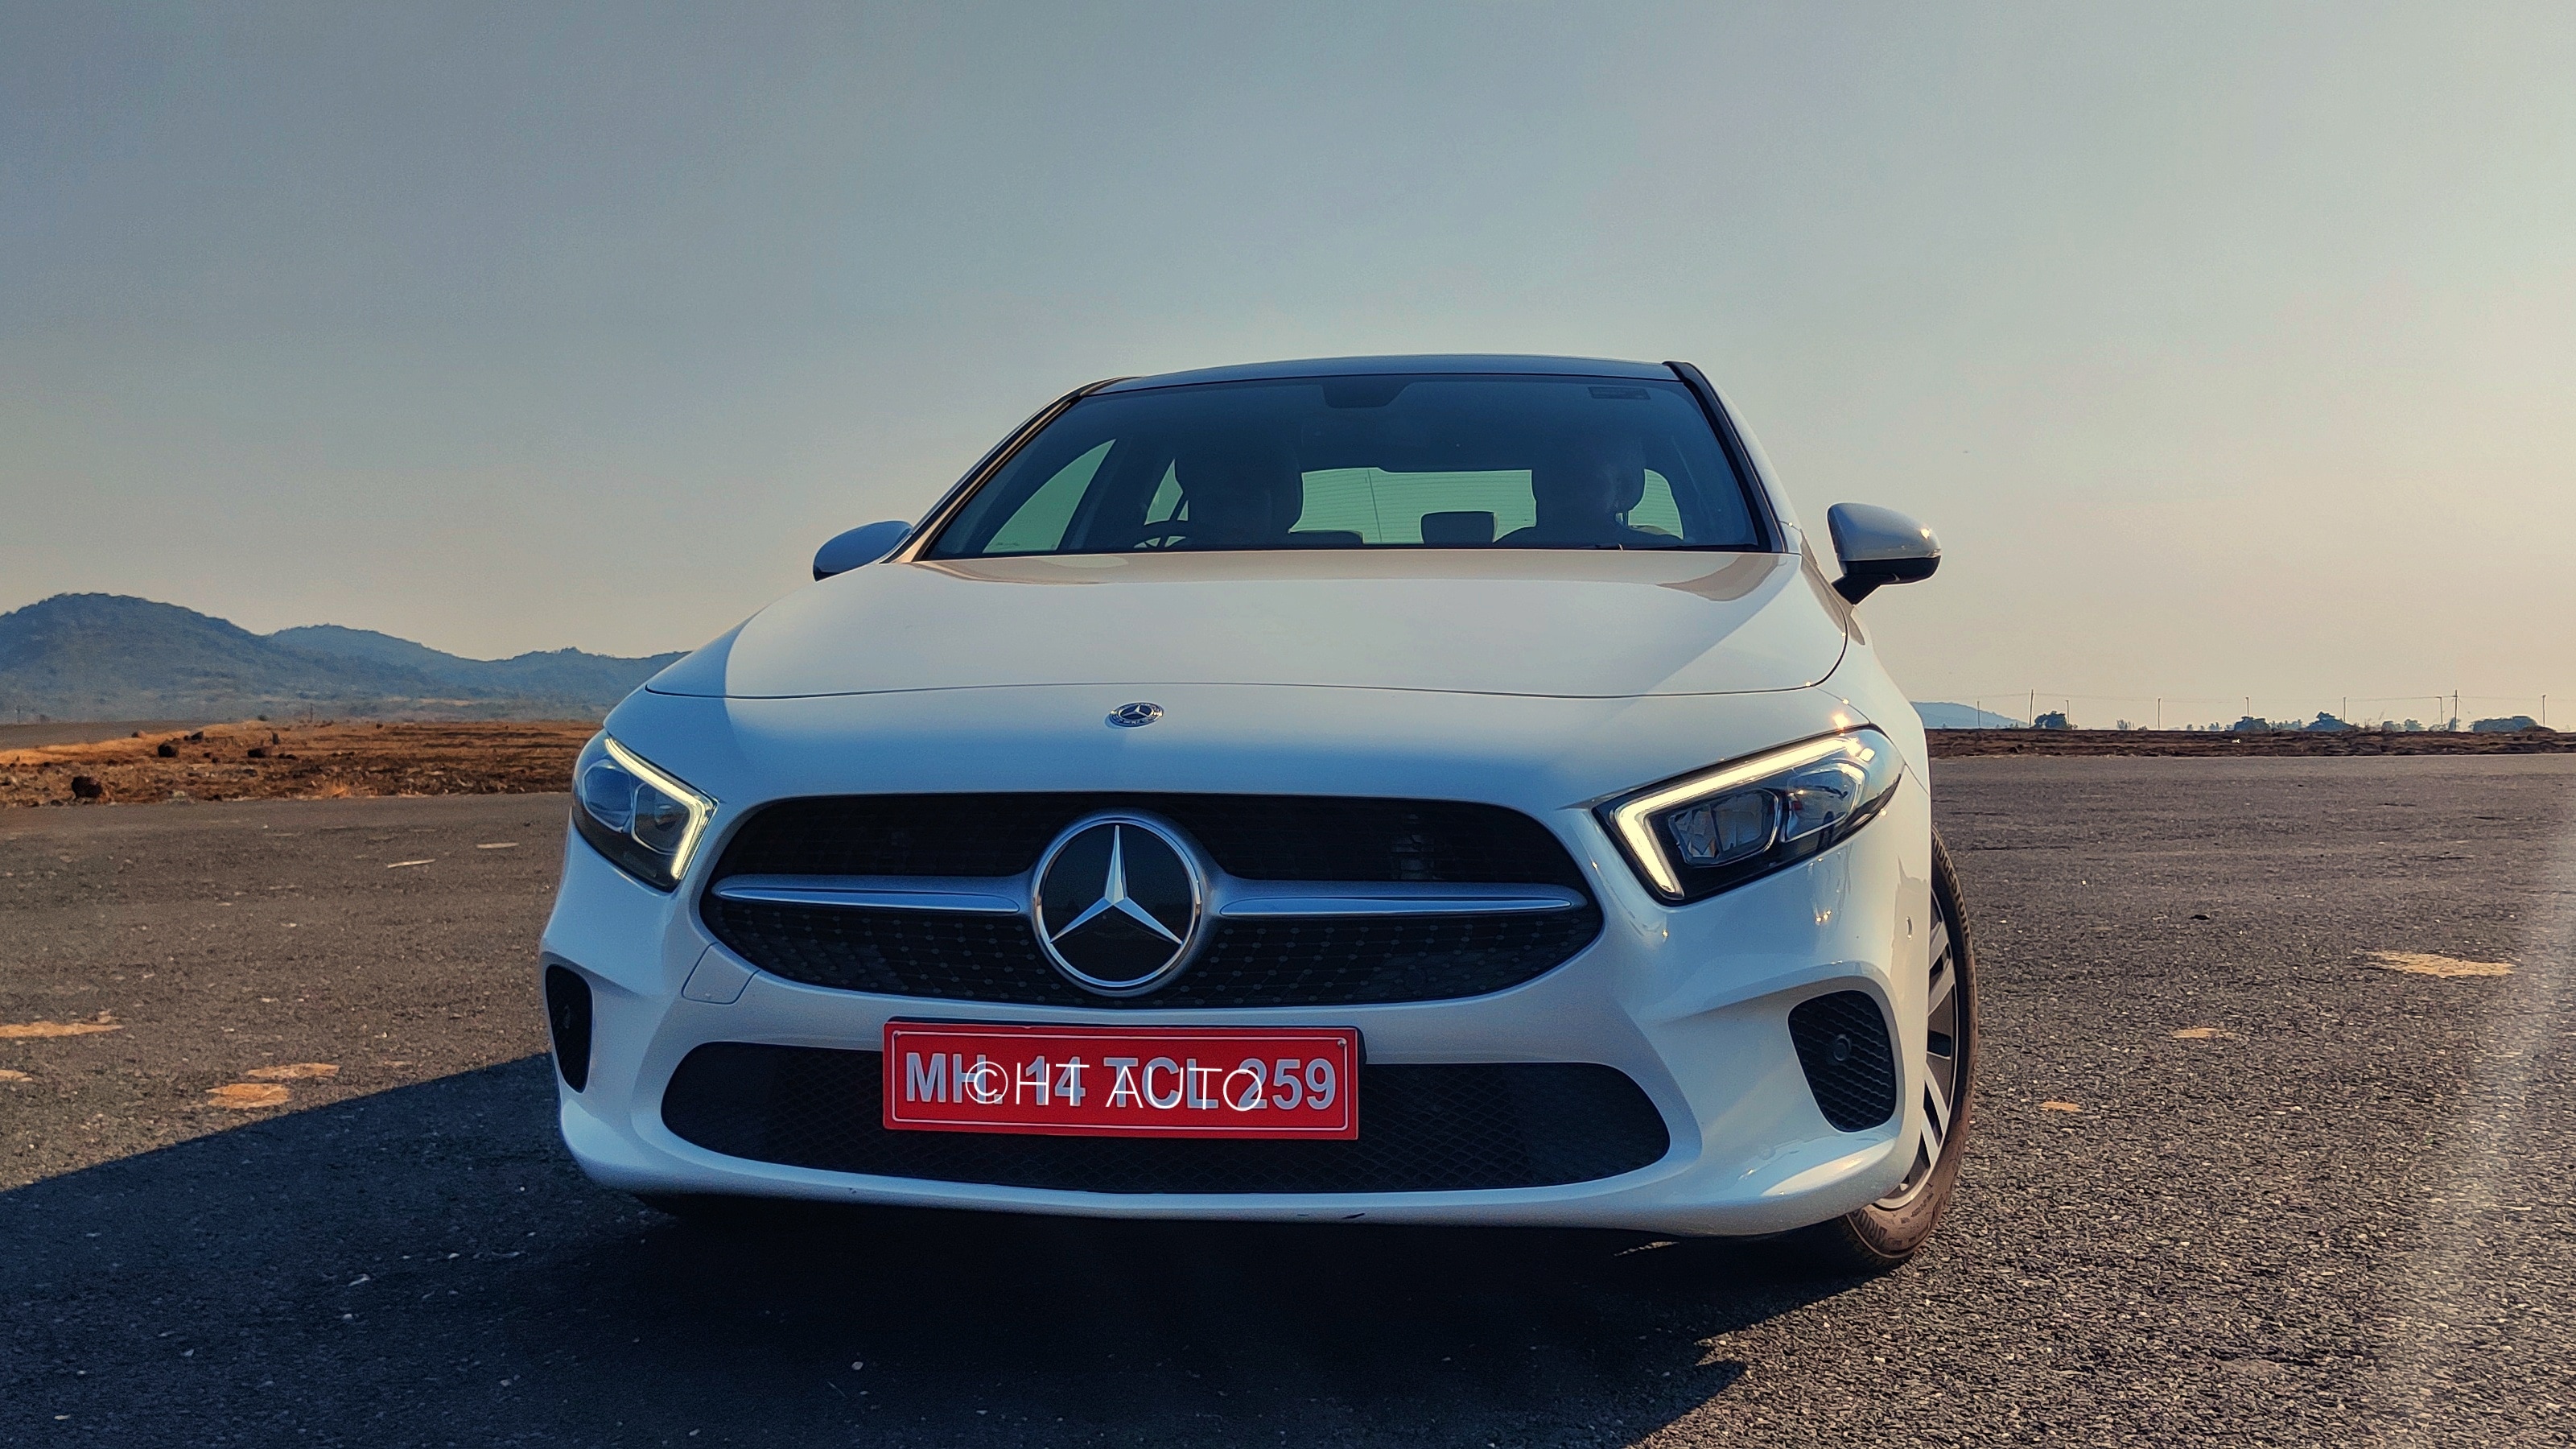 The A-Class Limousine has a smart face that isn't outright flashy but is still quite appealing. (HT Auto/Sabyasachi Dasgupta)